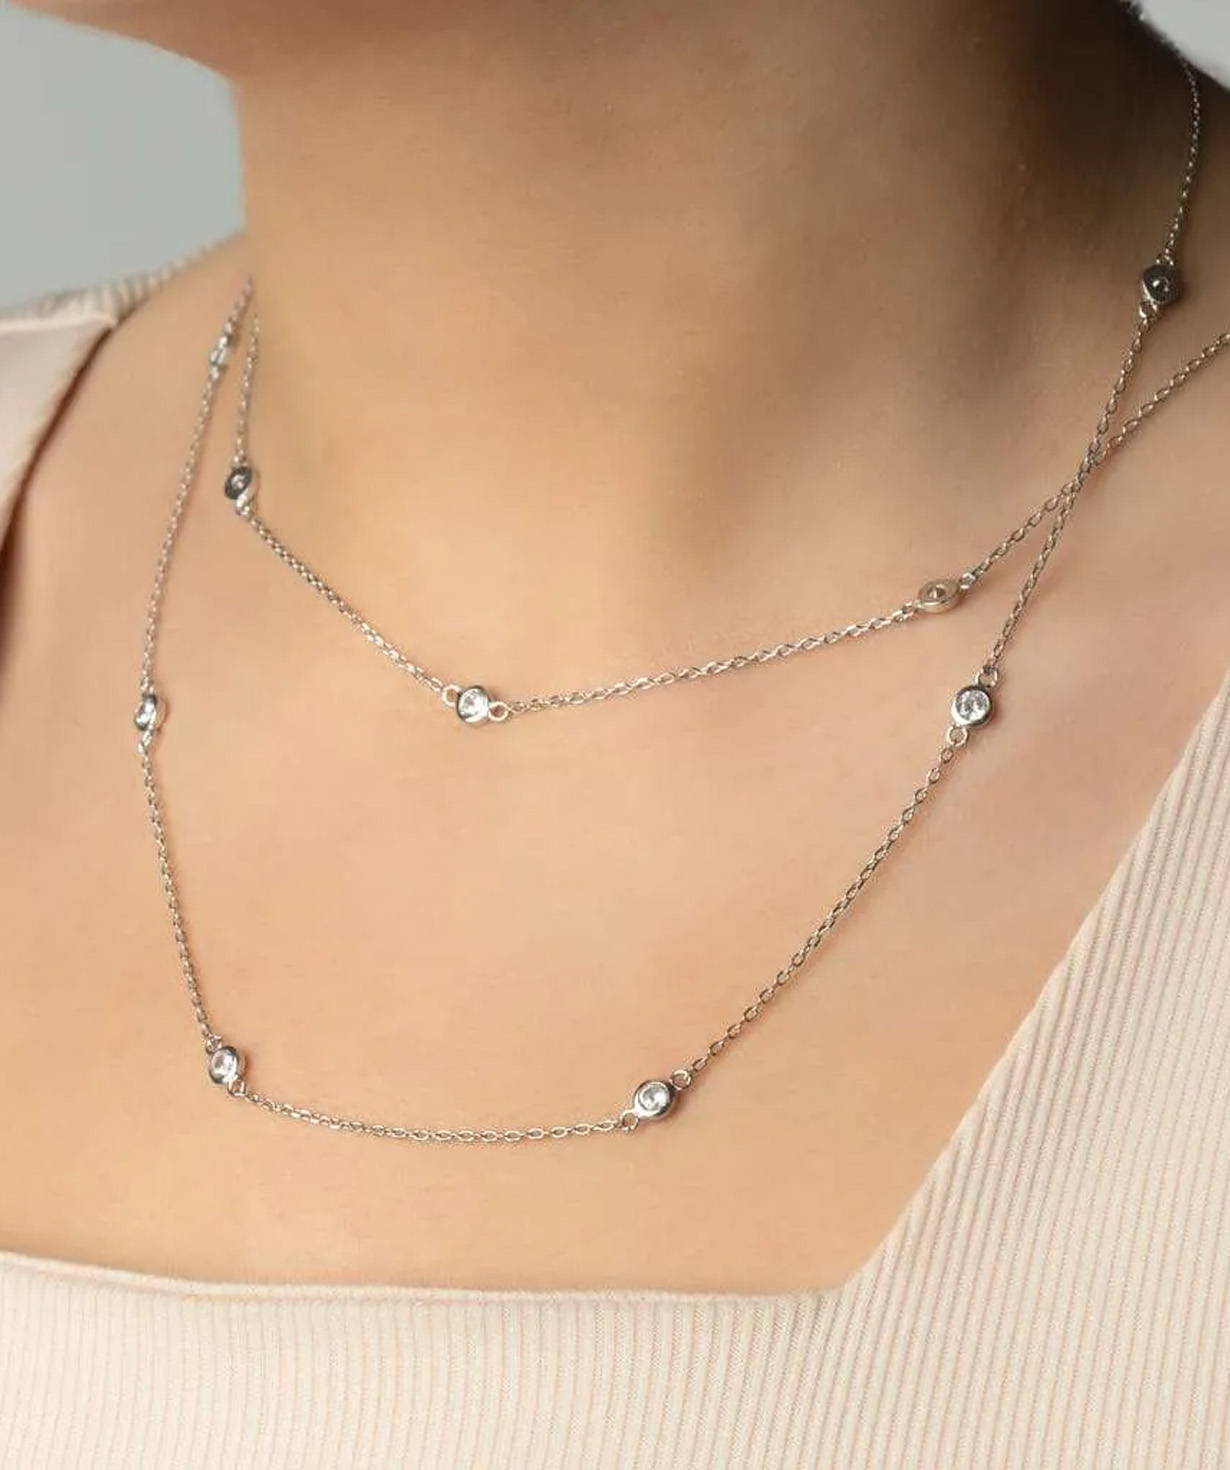 Silver necklace «Siamoods» SN247